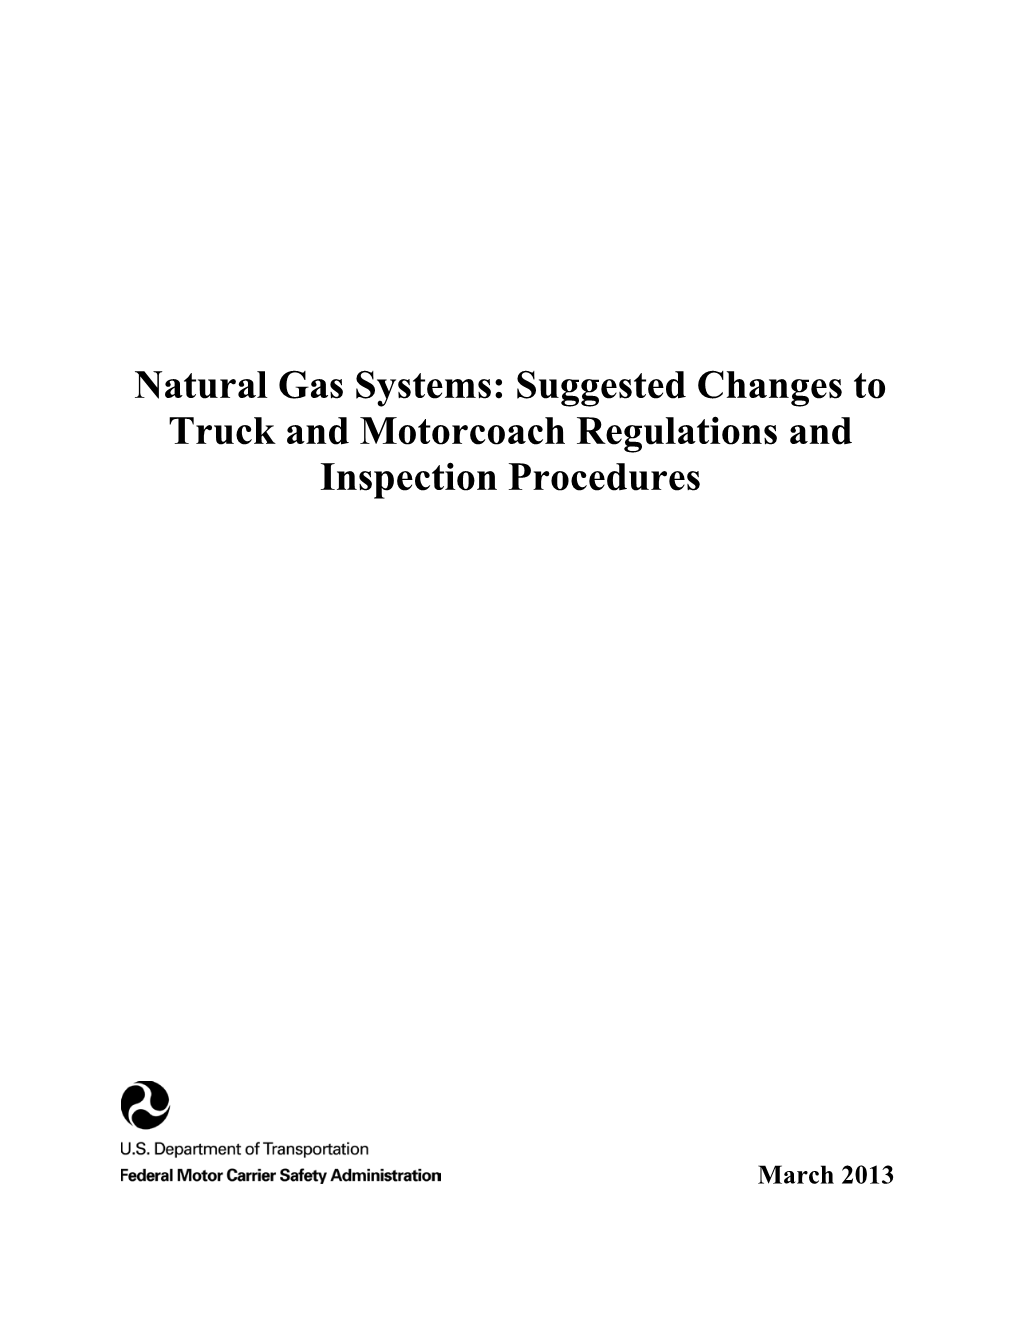 Natural Gas Systems: Suggested Changes to Truck and Motorcoach Regulations and Inspection Procedures